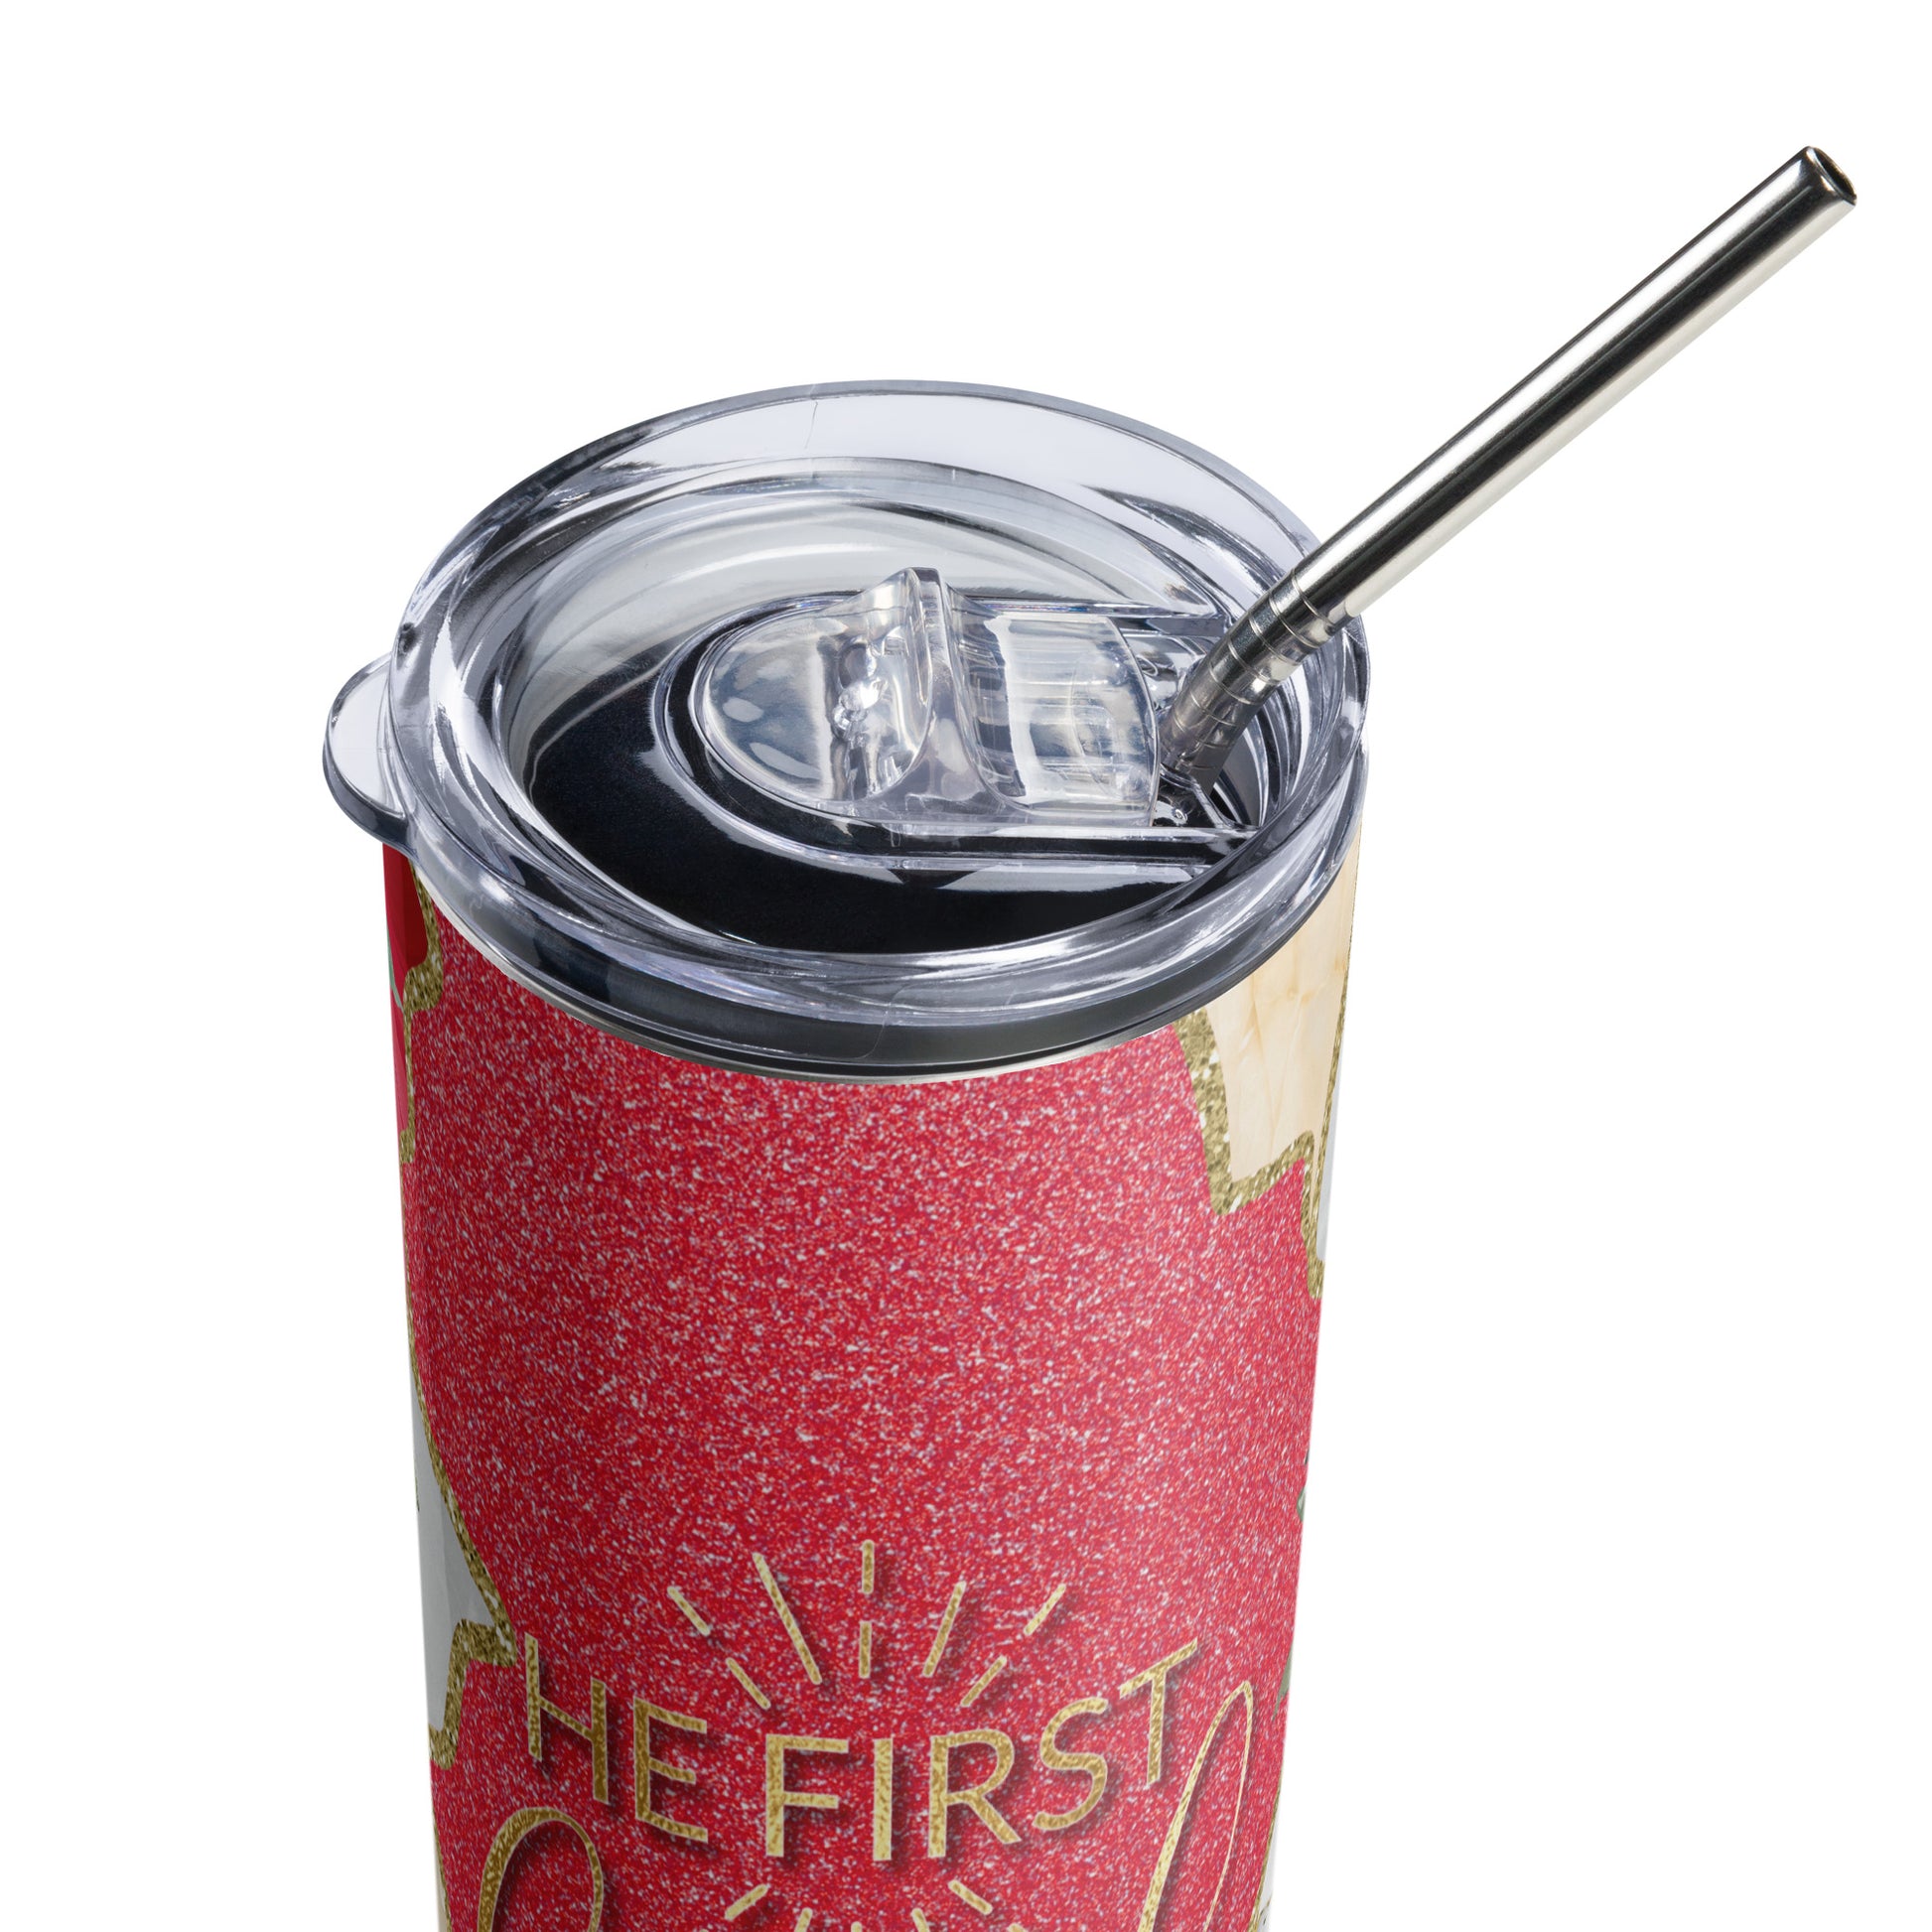 Top view 20oz stainless steel tumbler with 'He First Loved Us' design